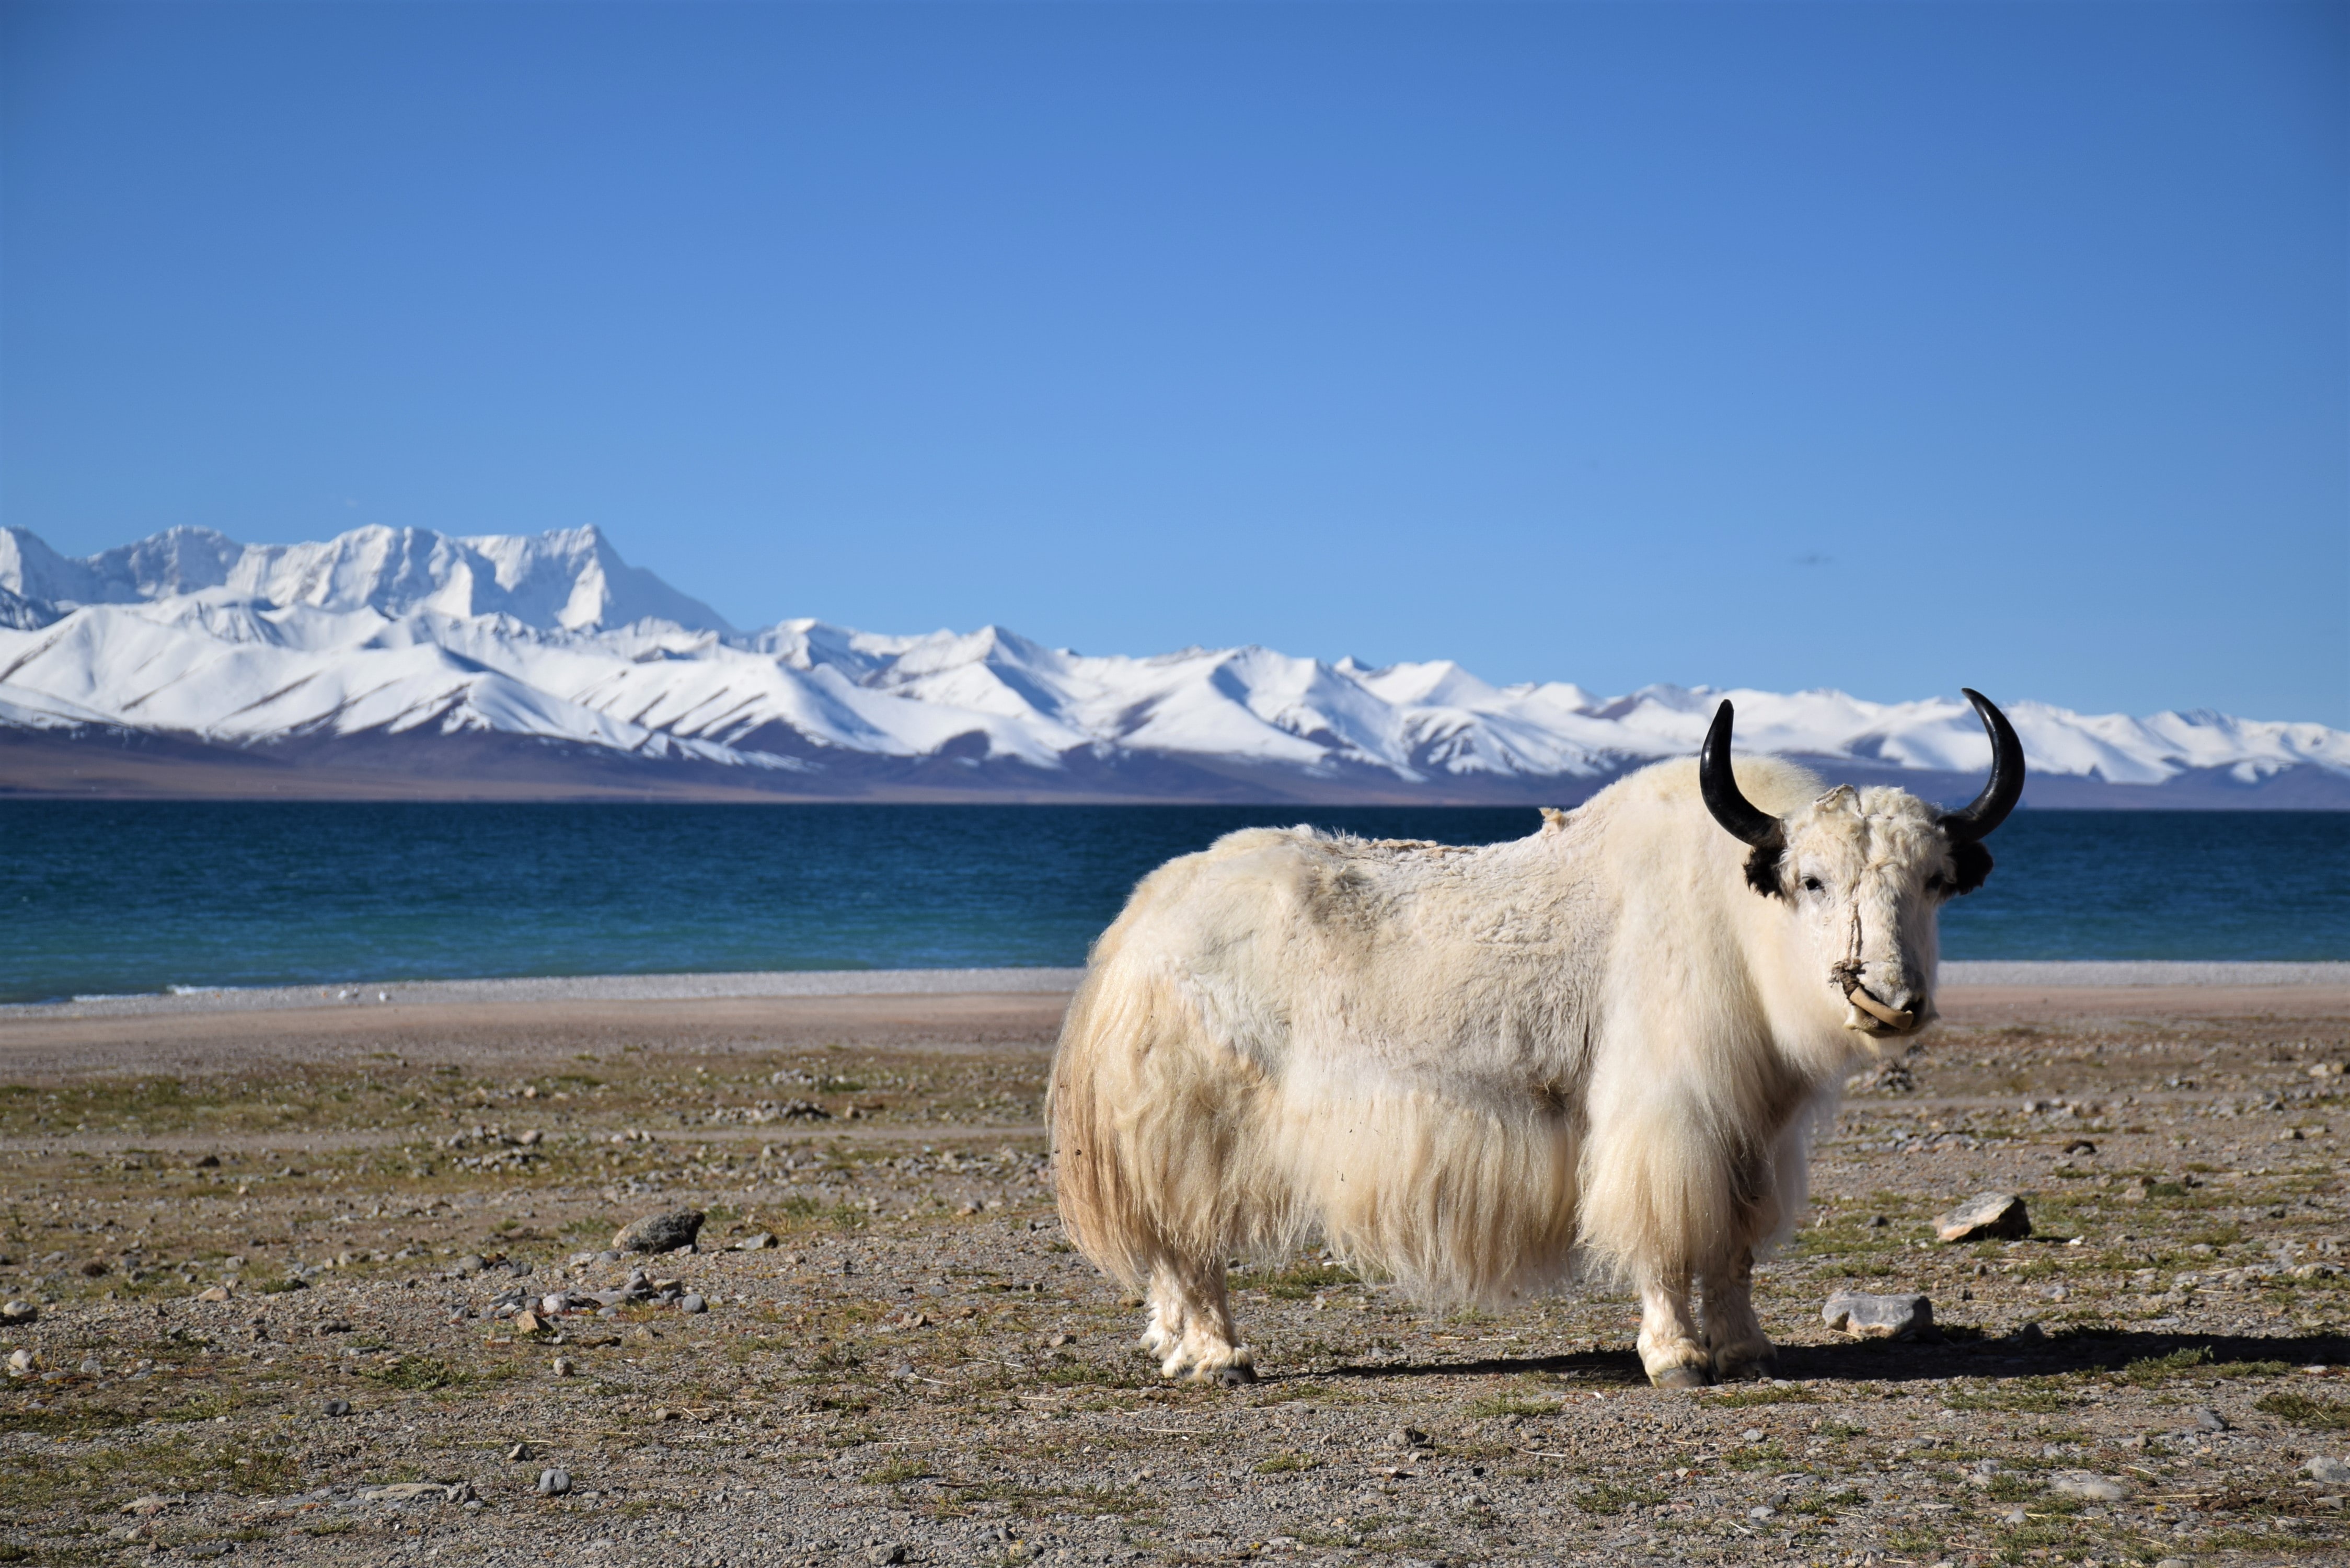  A white yak stands on the shore of a lake in Tibet, with a snow-capped mountain in the distance.